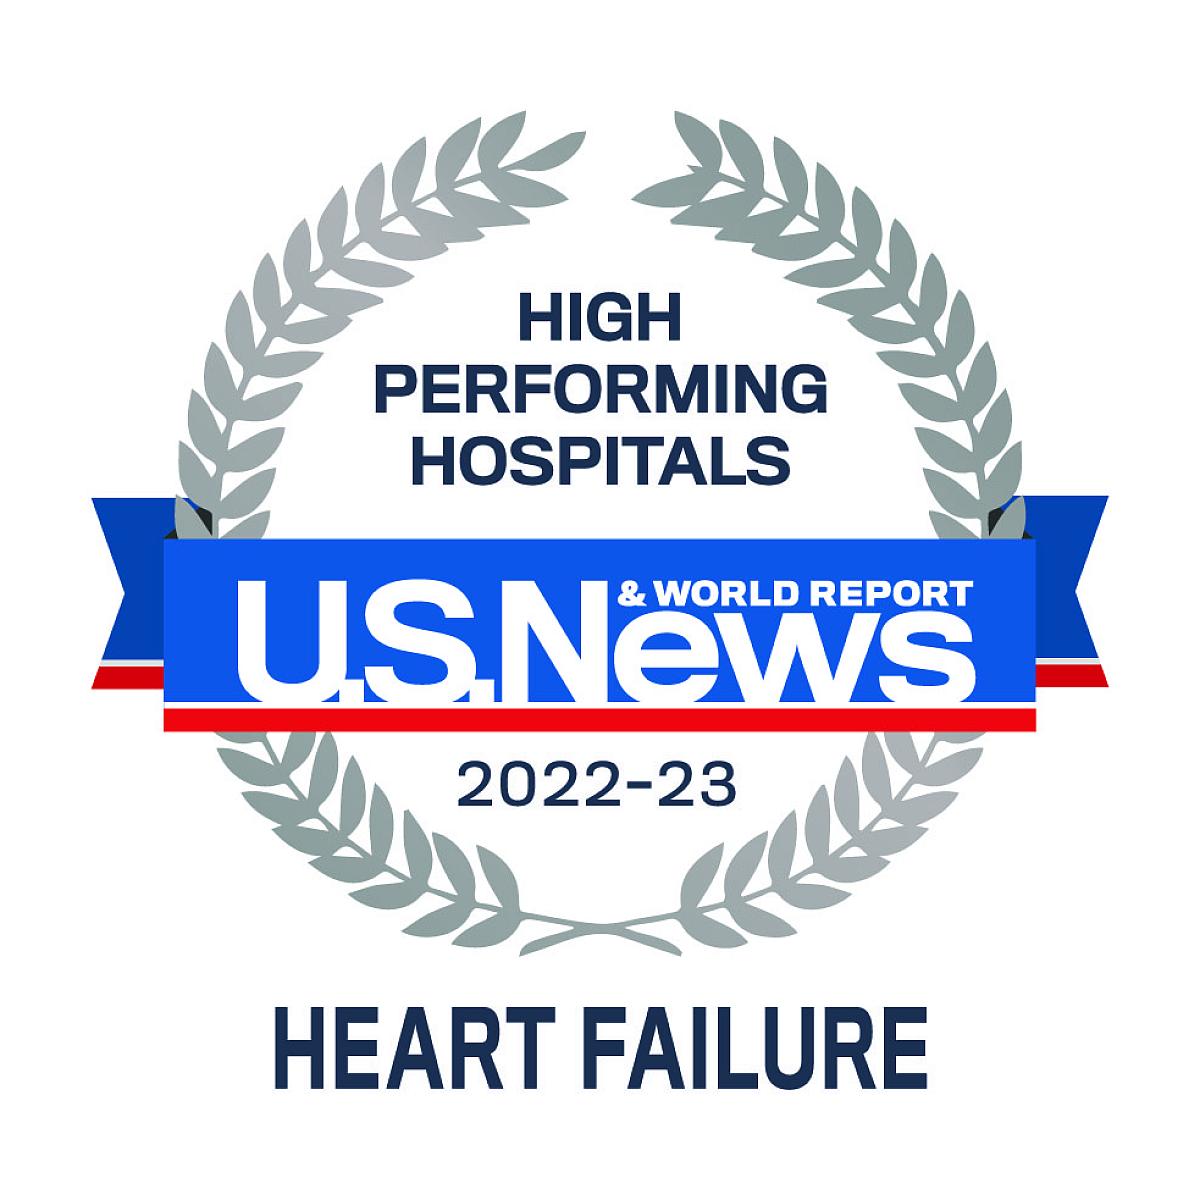 U.S. News and World Report High Performing Heart Failure